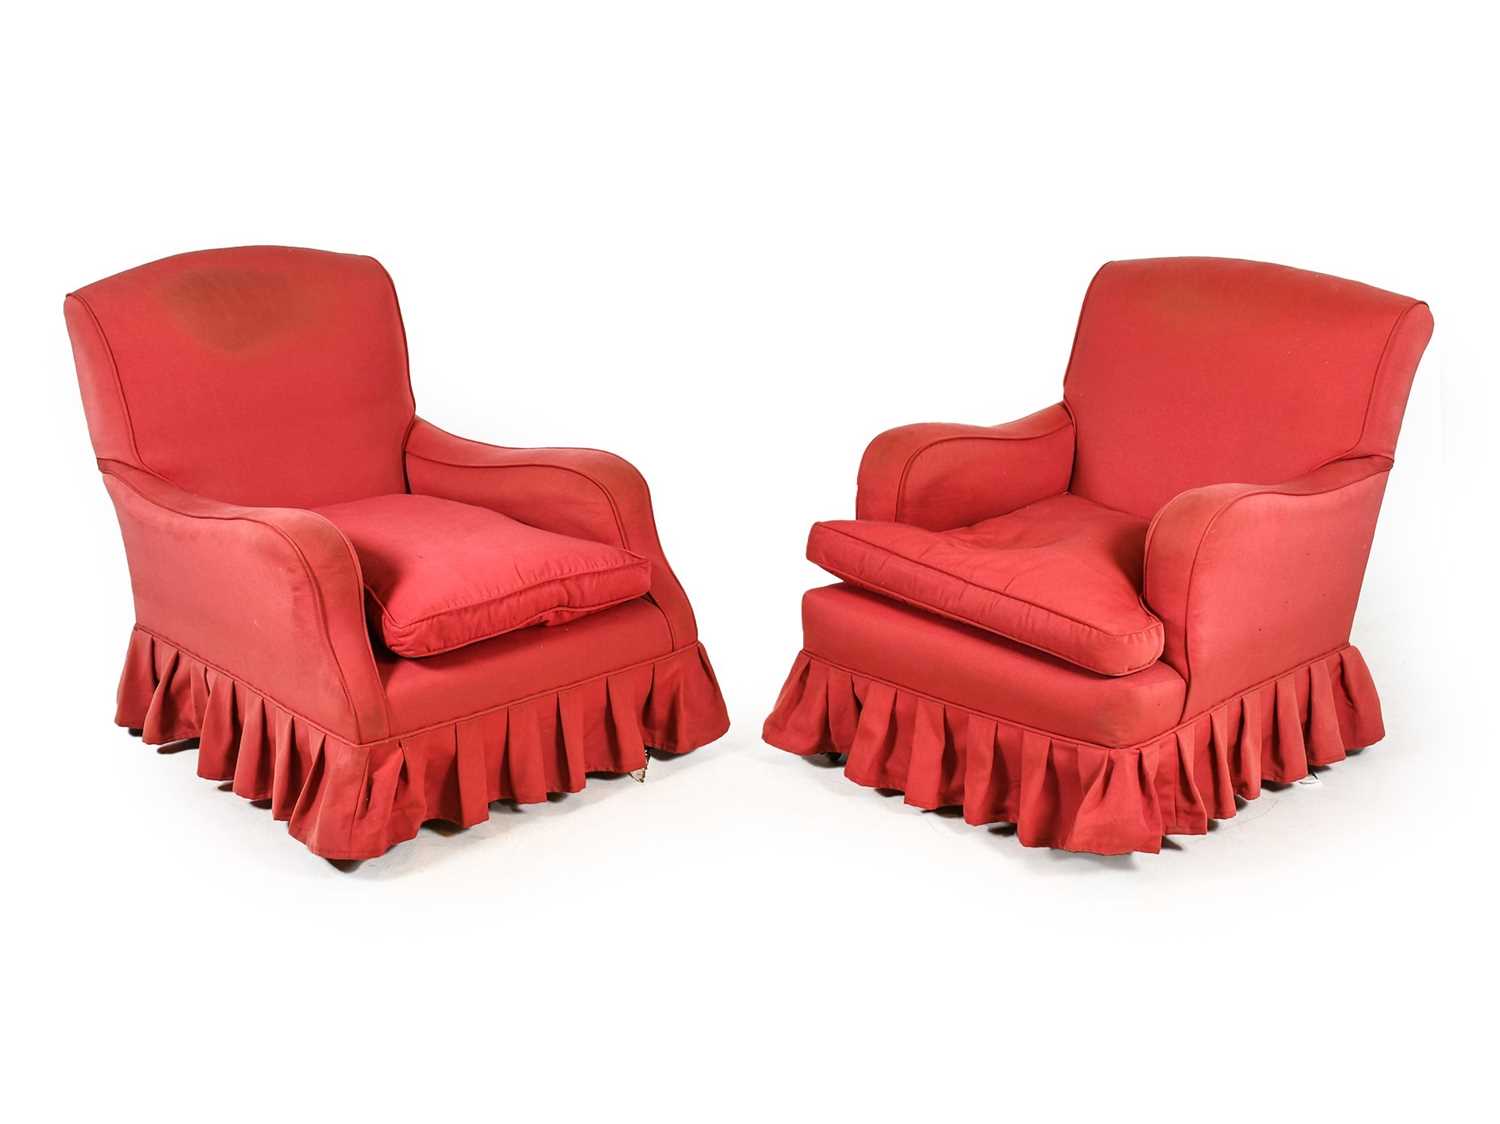 ^ Howard & Sons Ltd: A Pair of Early 20th Century Bridgewater Deep-Seated Armchairs, covered in